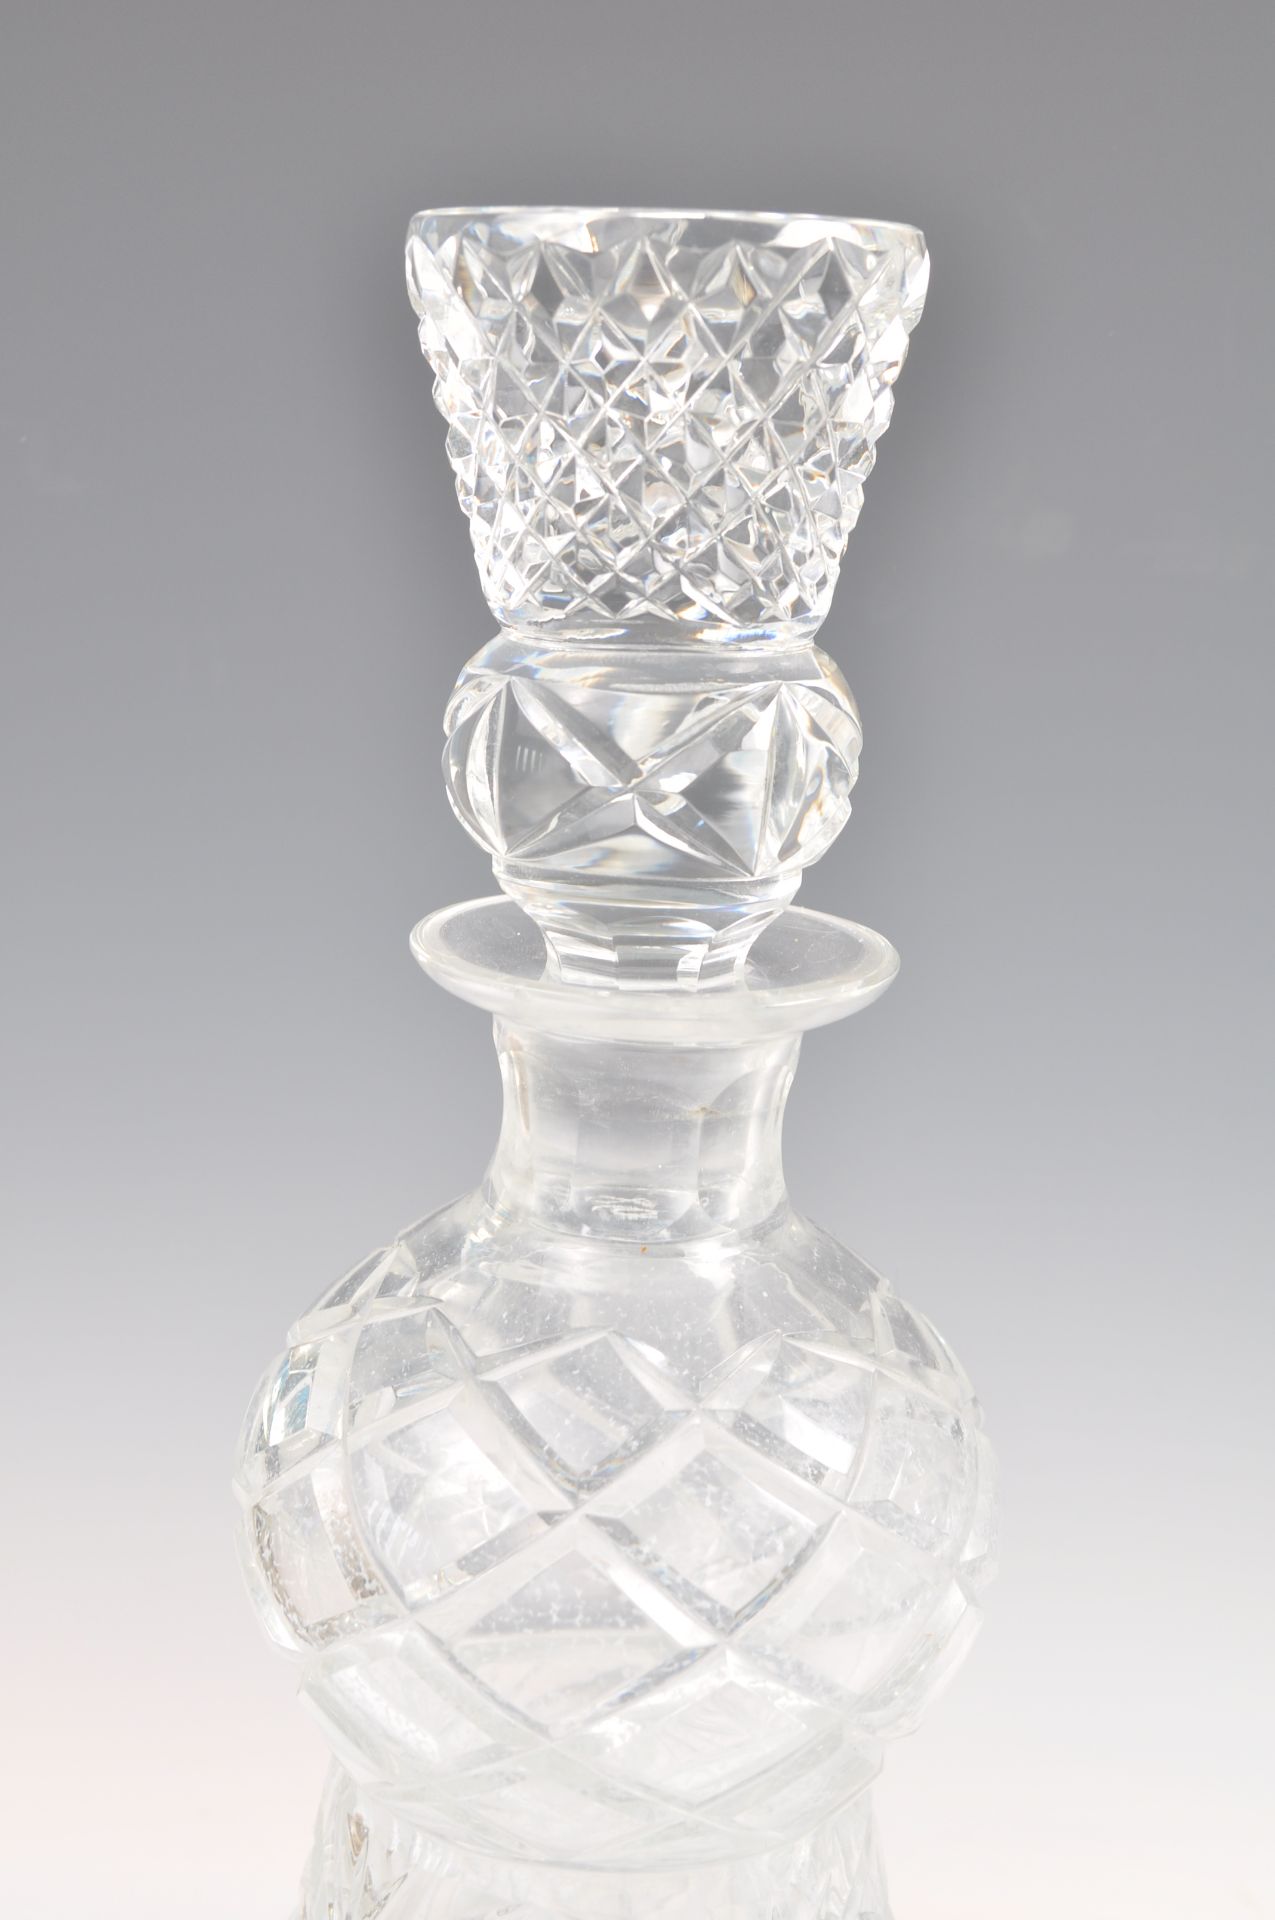 PAIR OF 19TH CENTURY SCOTTISH CUT GLASS THISTLE DECANTERS. - Image 2 of 4